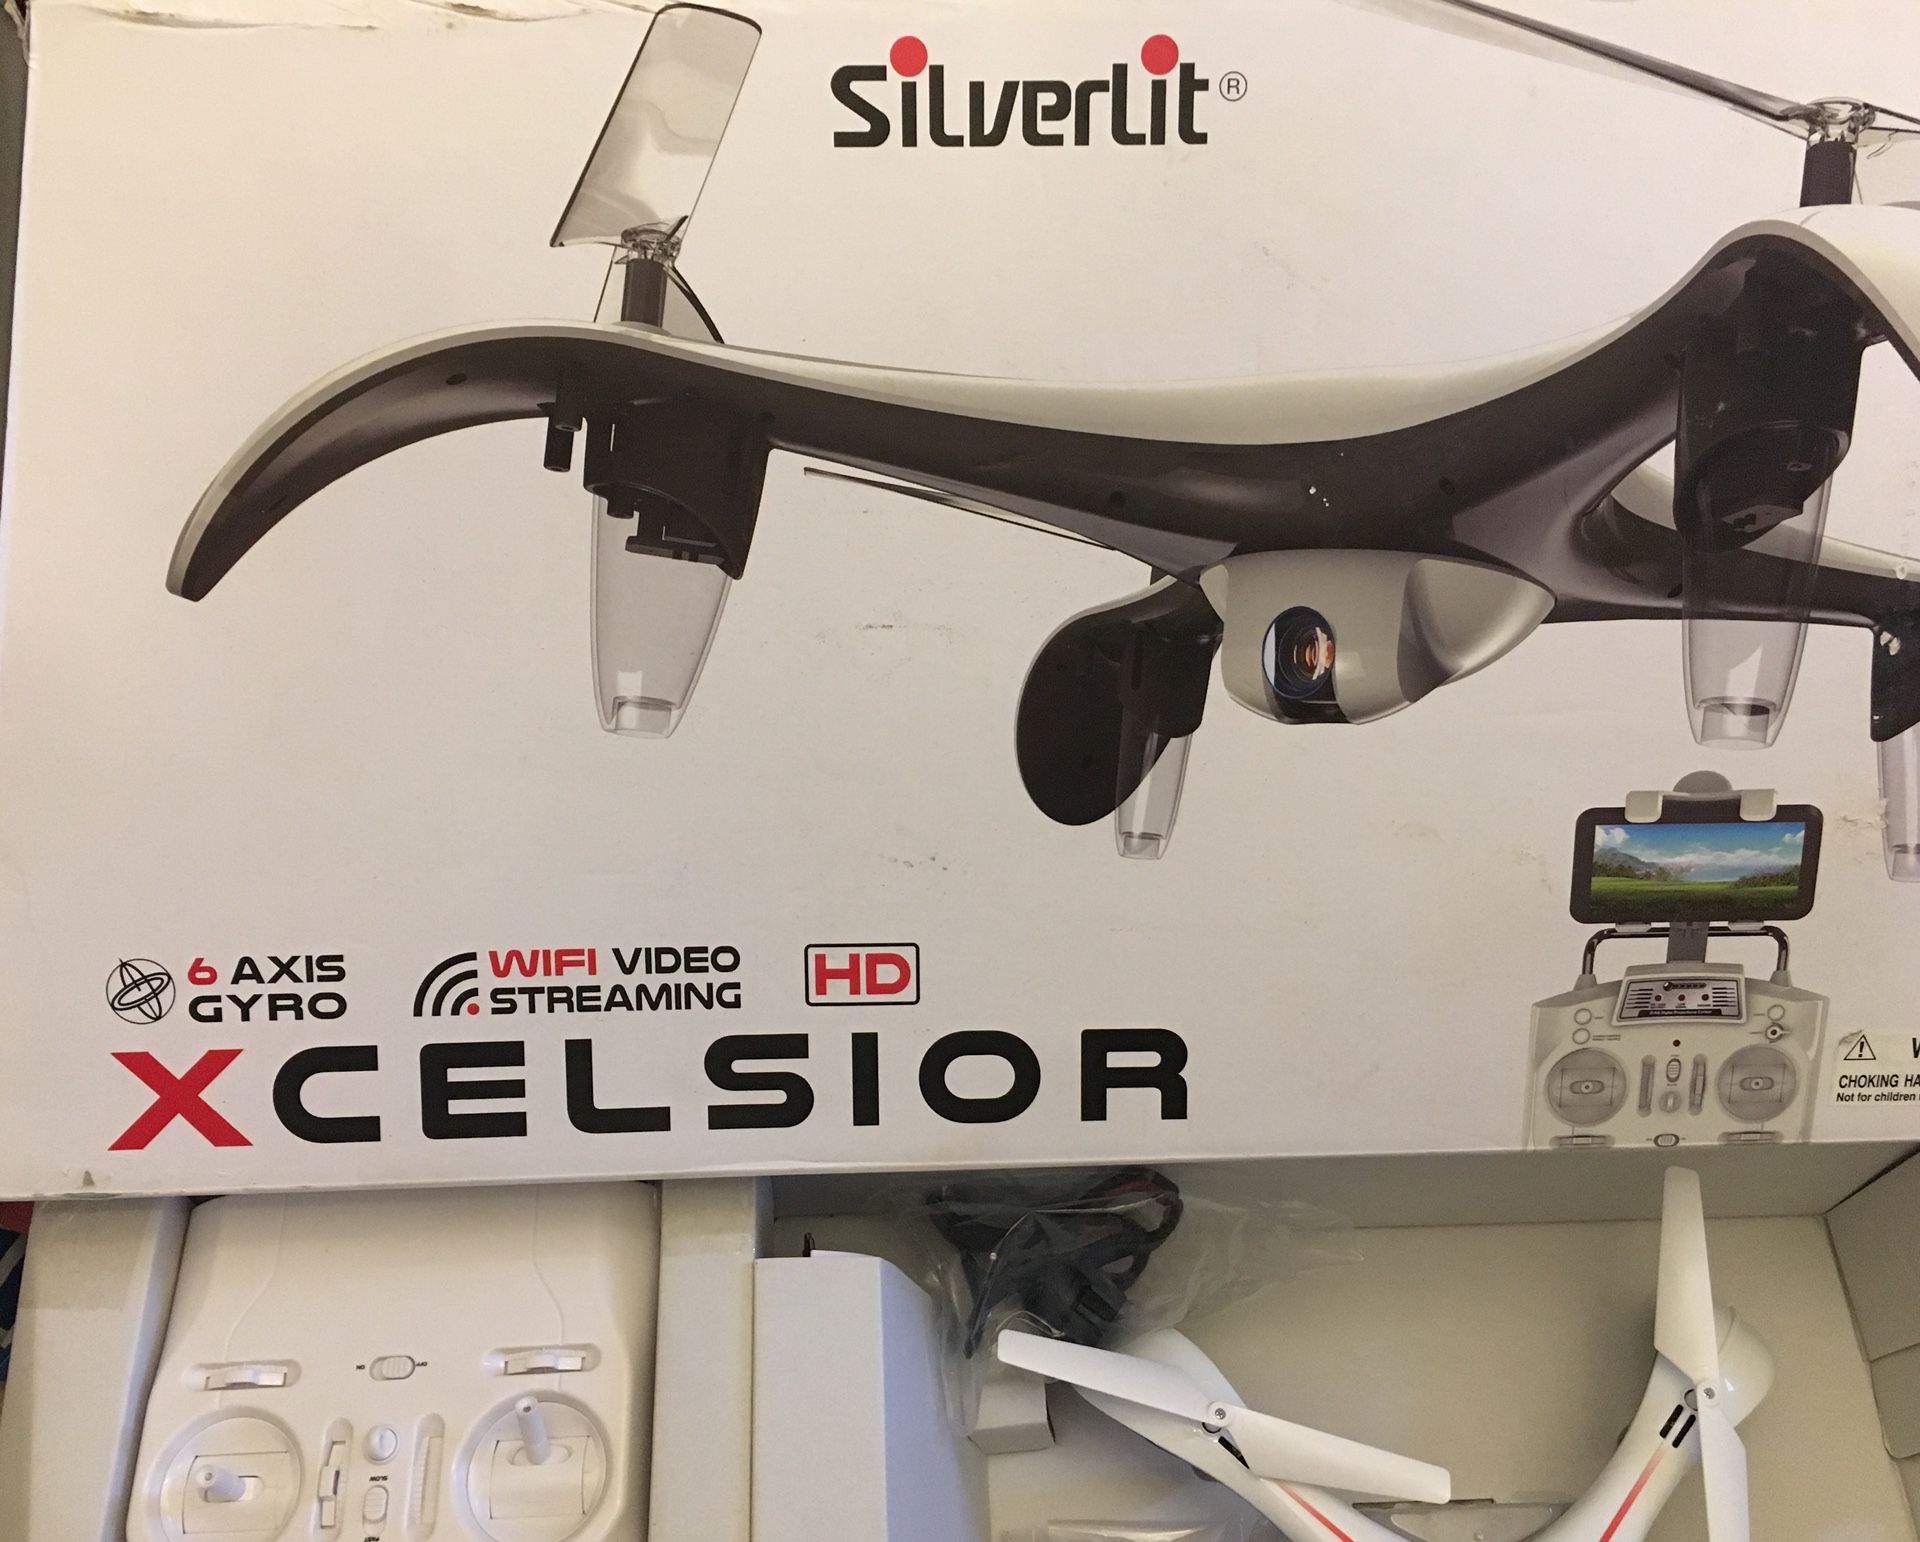 Silverlit Xcelsior Drone for Sale in Flossmoor, IL -